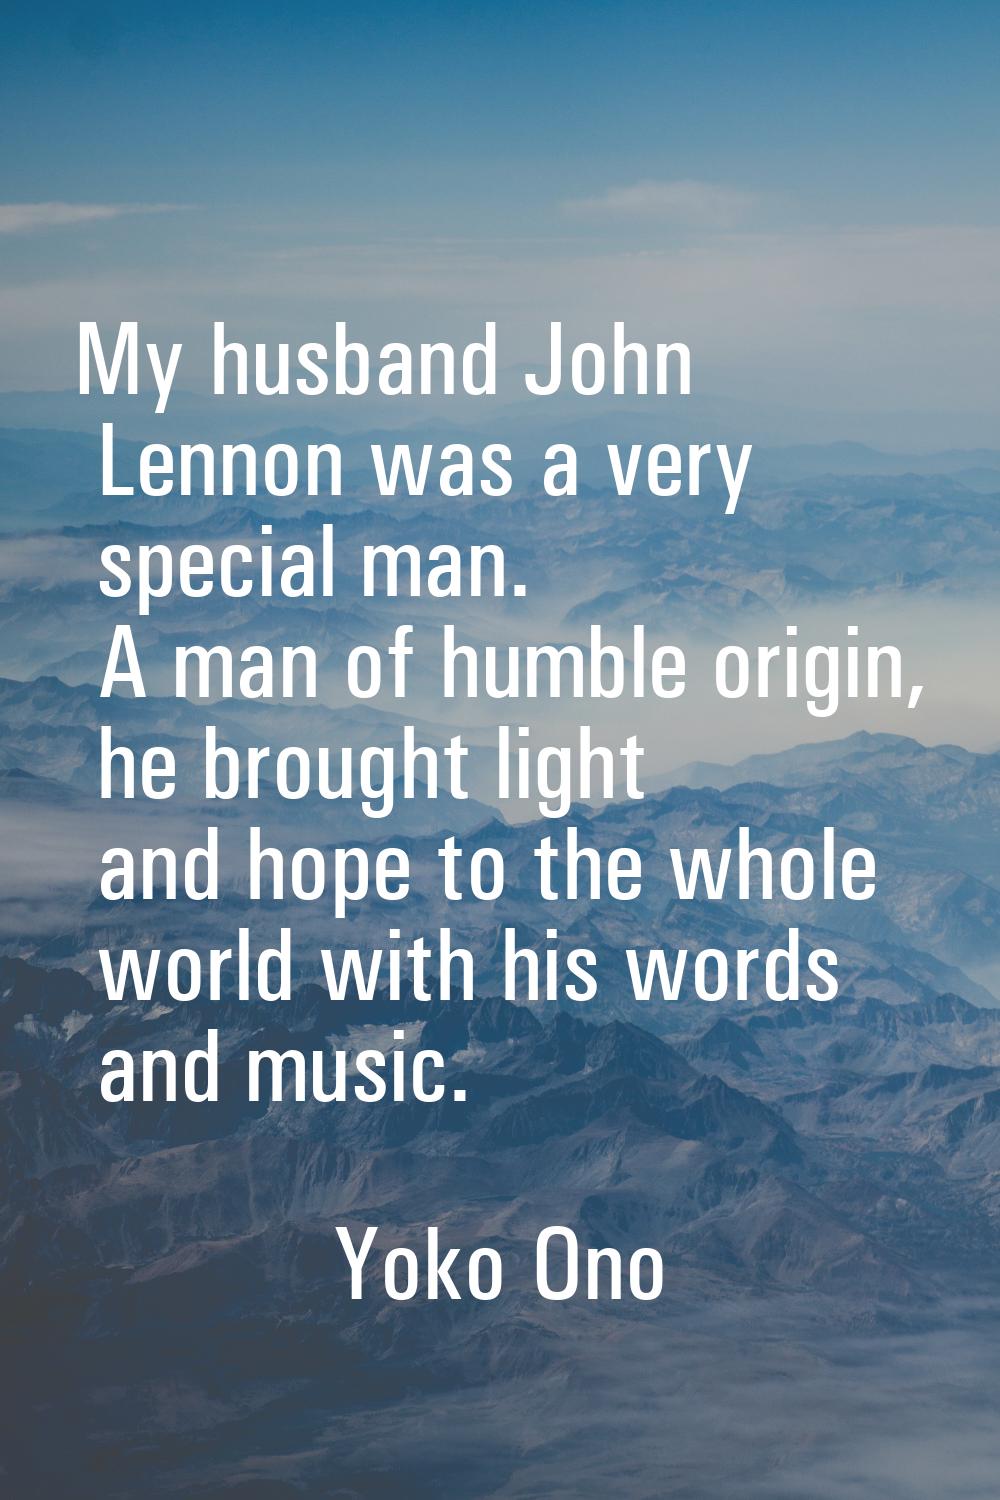 My husband John Lennon was a very special man. A man of humble origin, he brought light and hope to